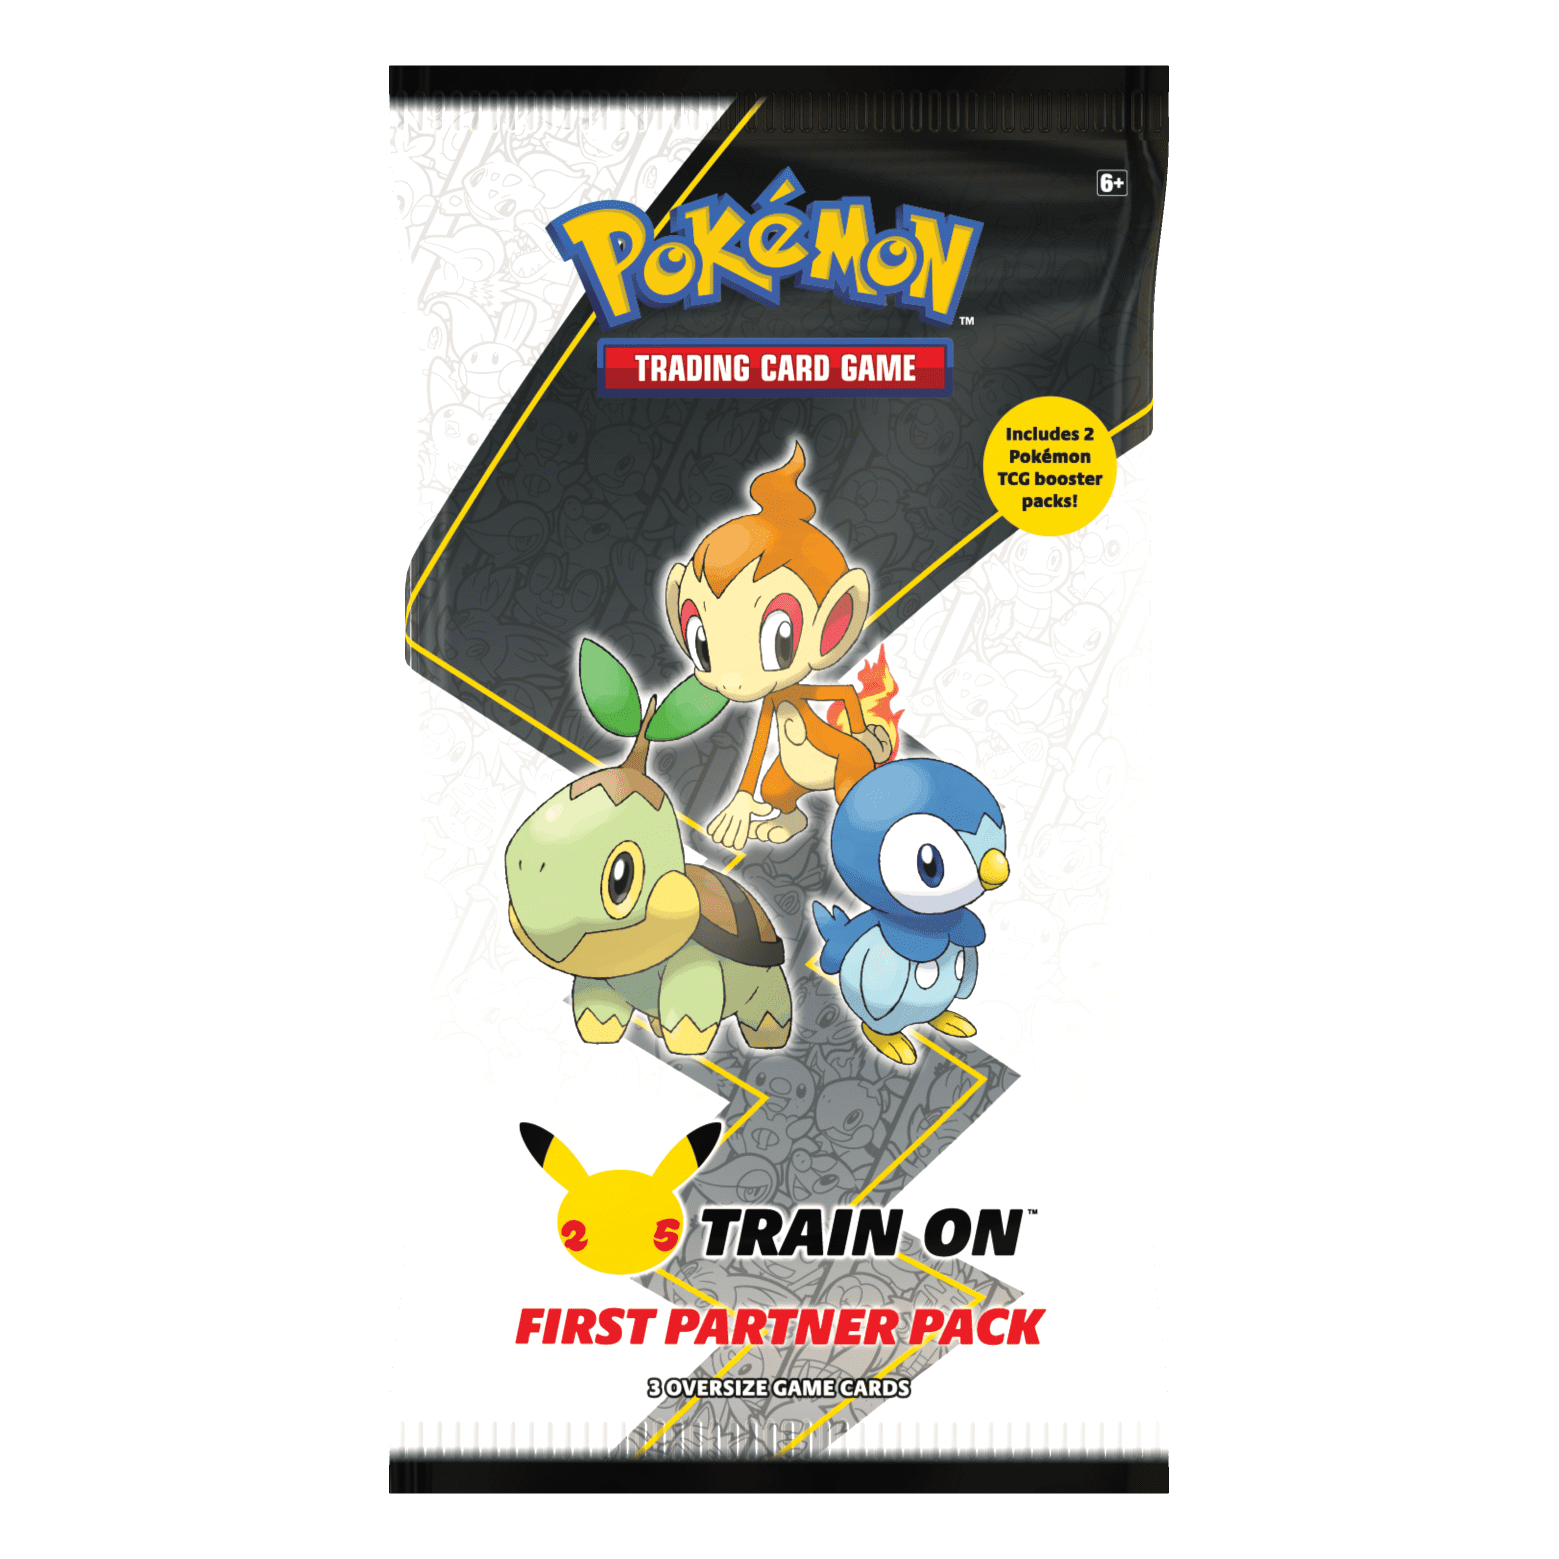 Pokemon 25th Train On First Partner Pack Oversized Cards and 2 Packs June 2021 